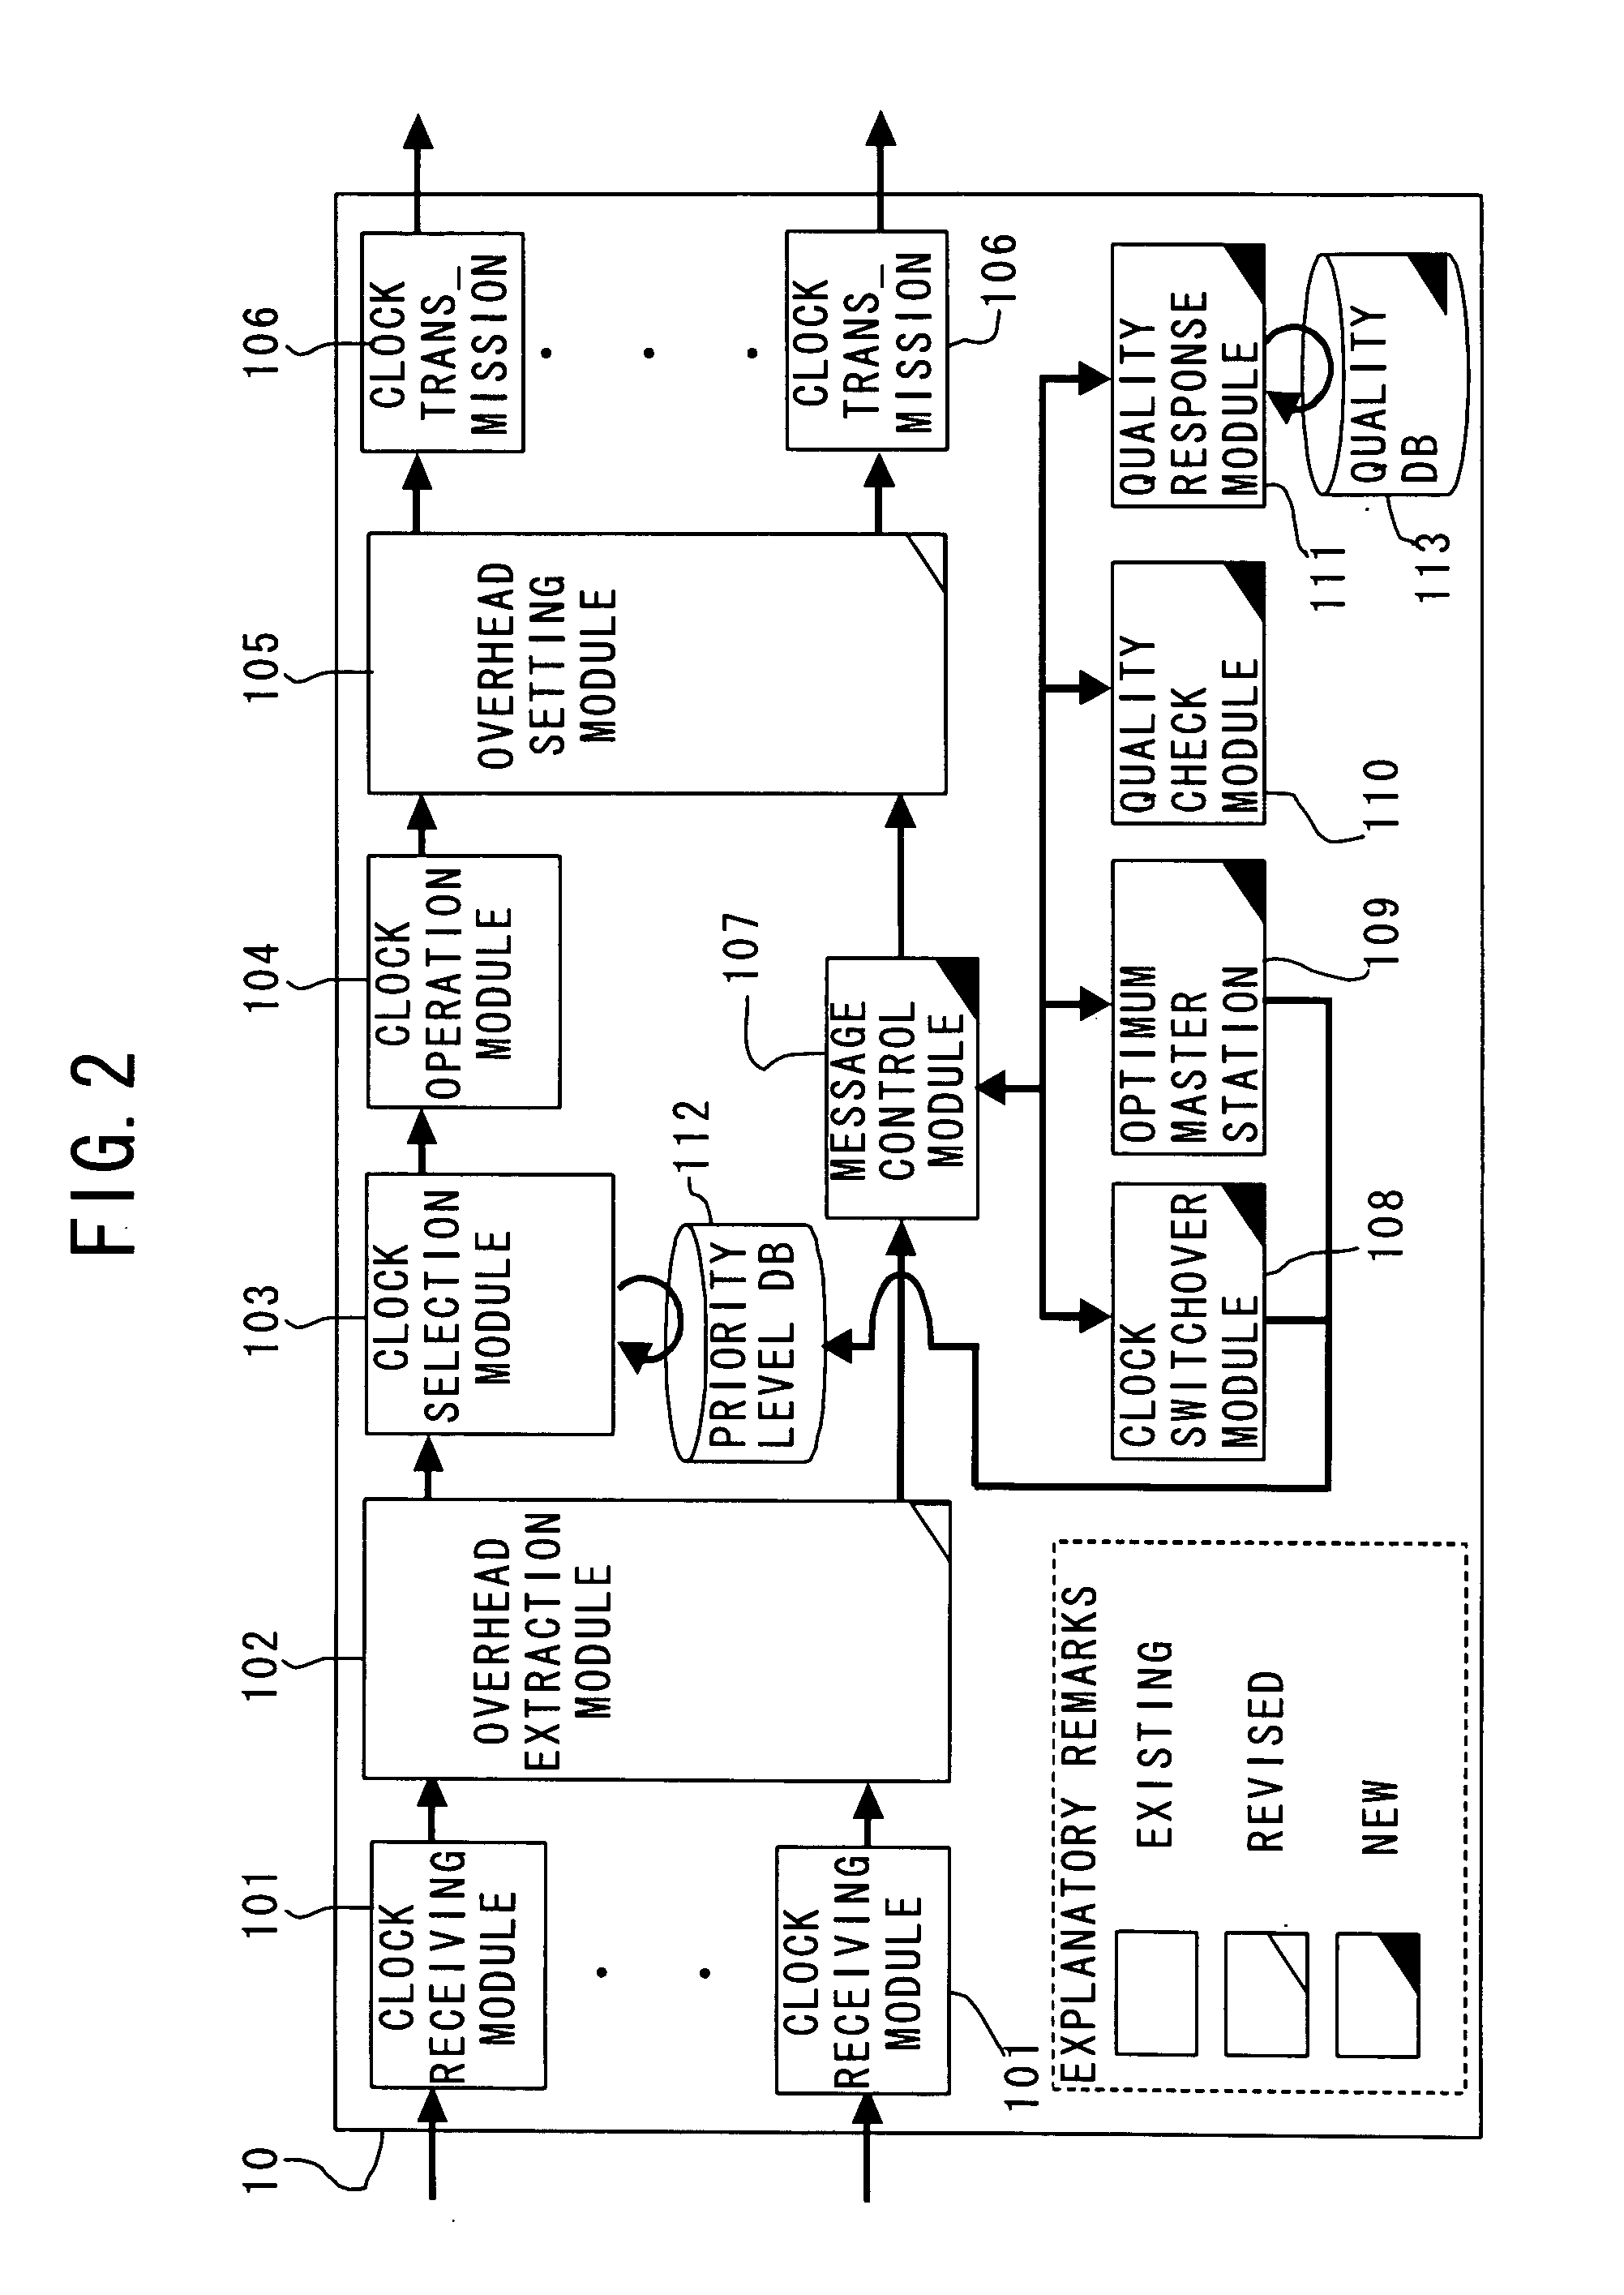 Synchronous transmission network system